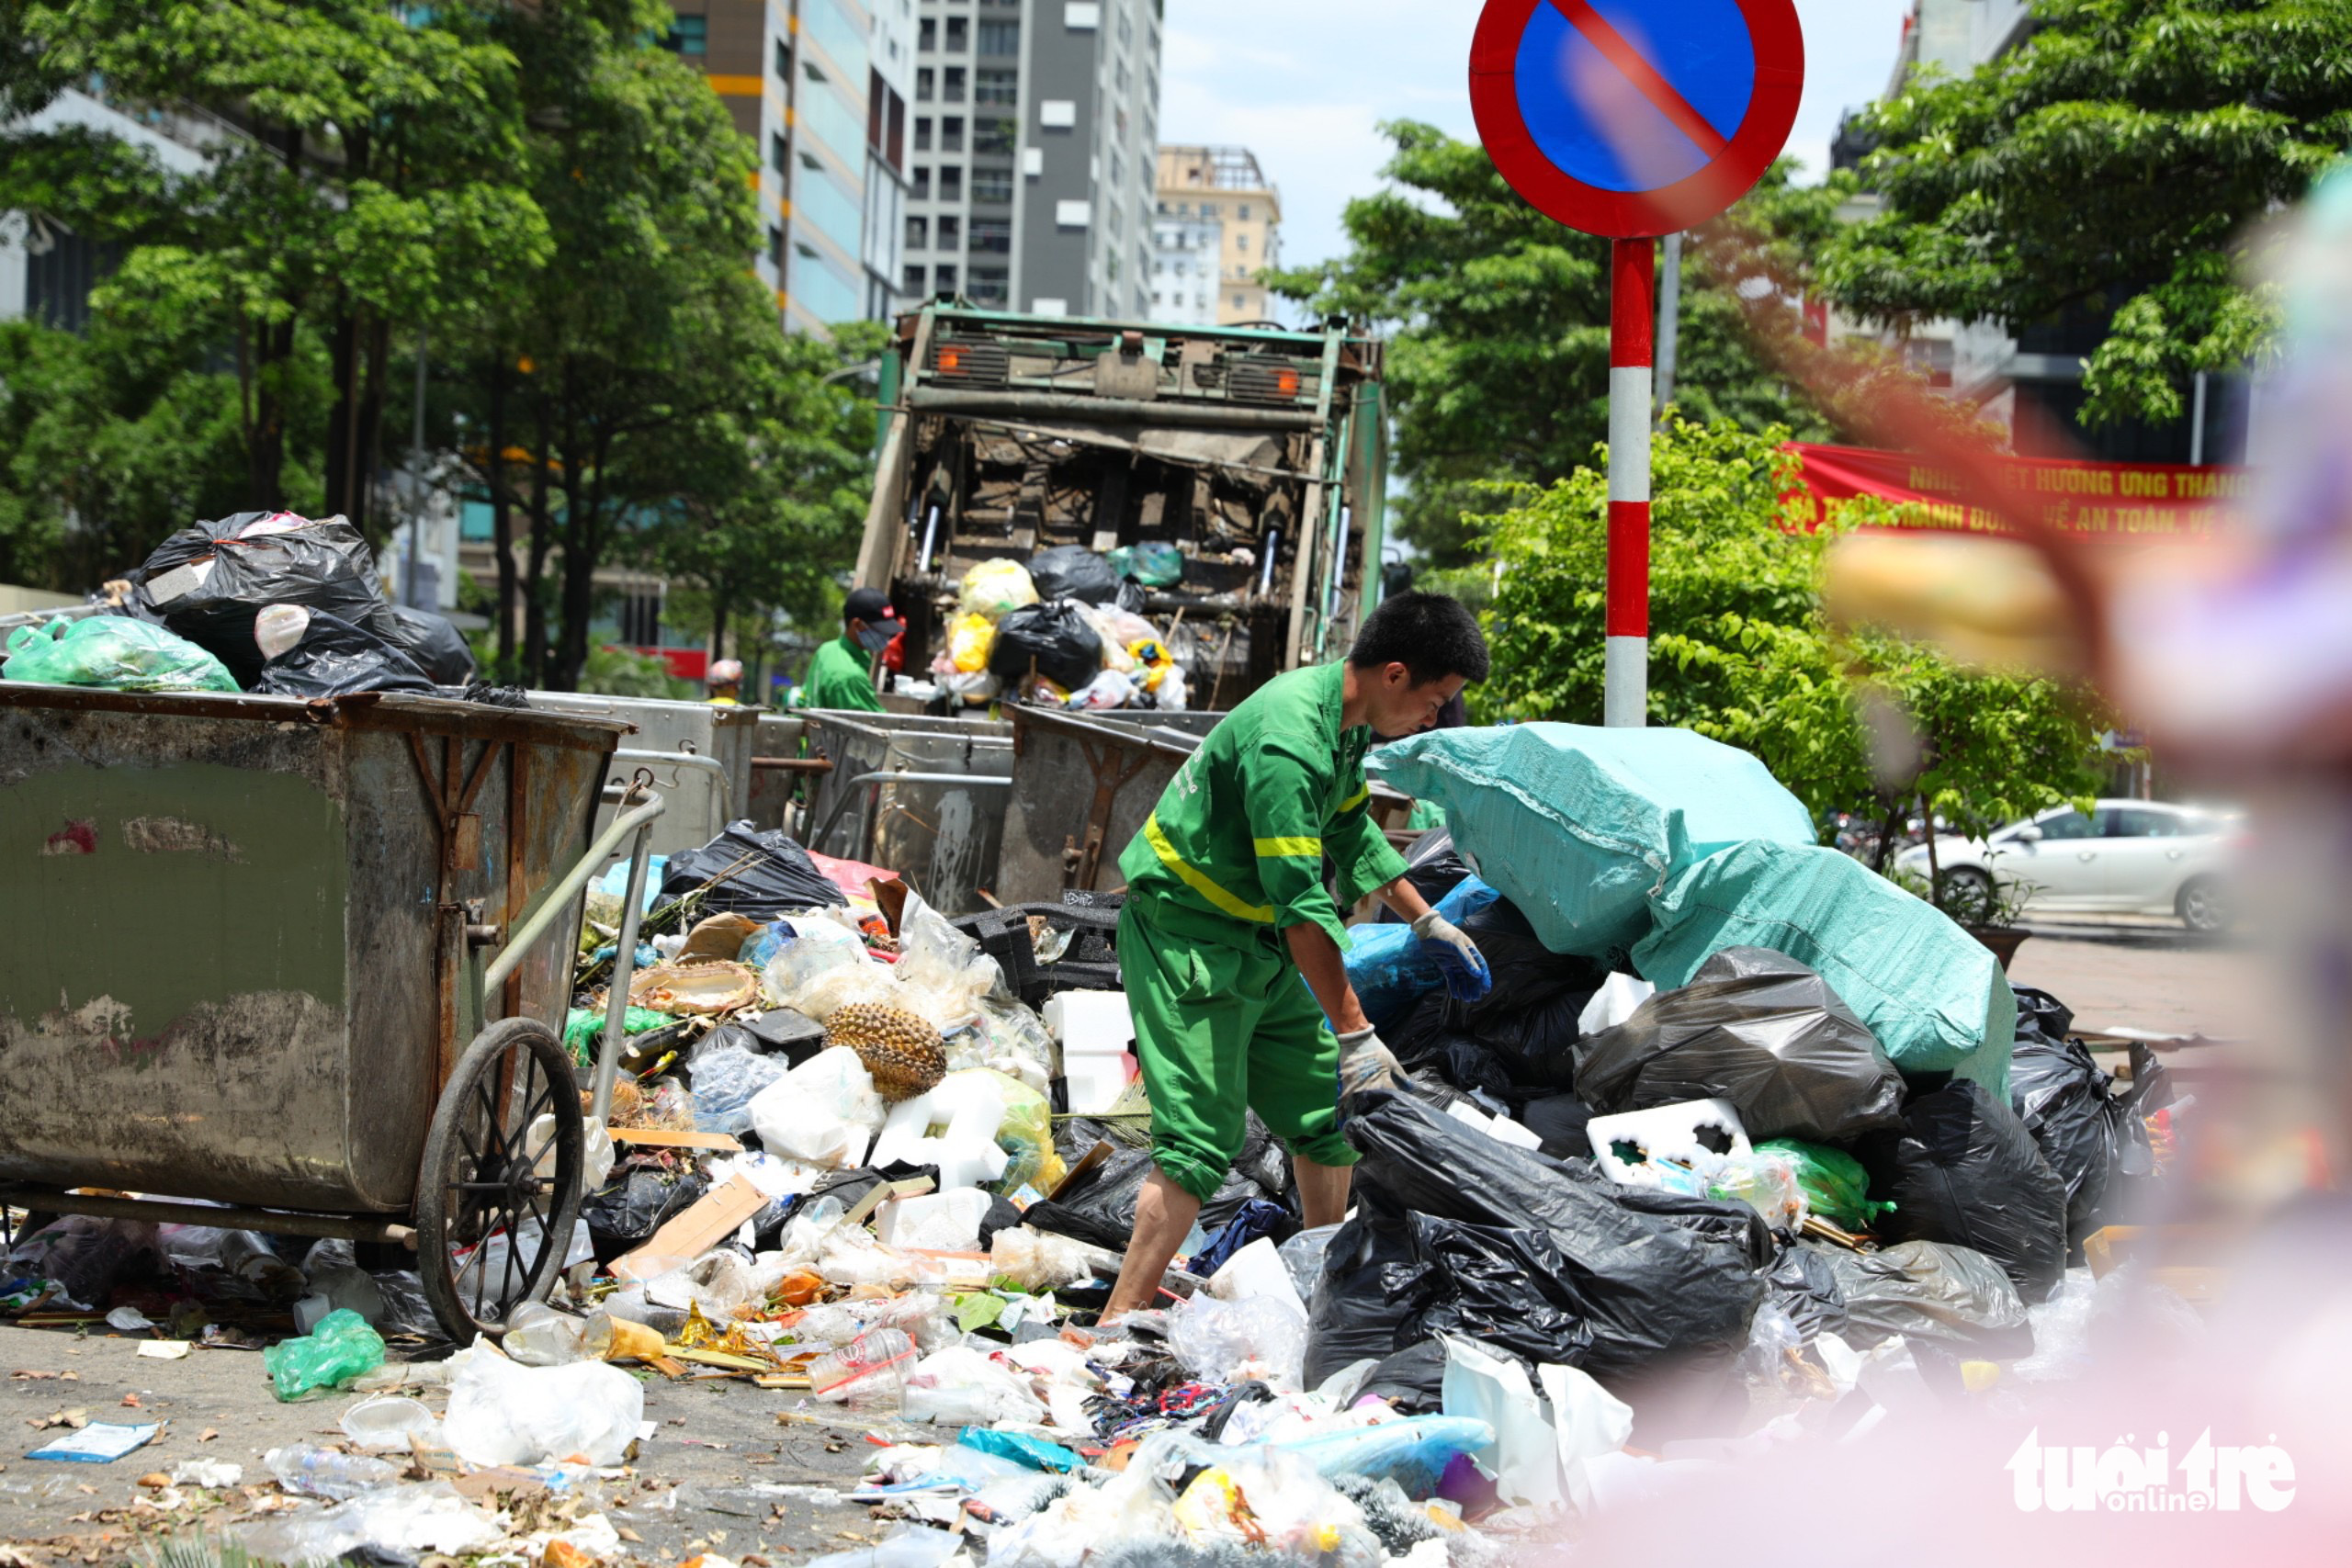 An environment worker collects garbage cart piling up on a street in Cau Giay District, Hanoi, June 17, 2022. Photo: Danh Khang / Tuoi Tre